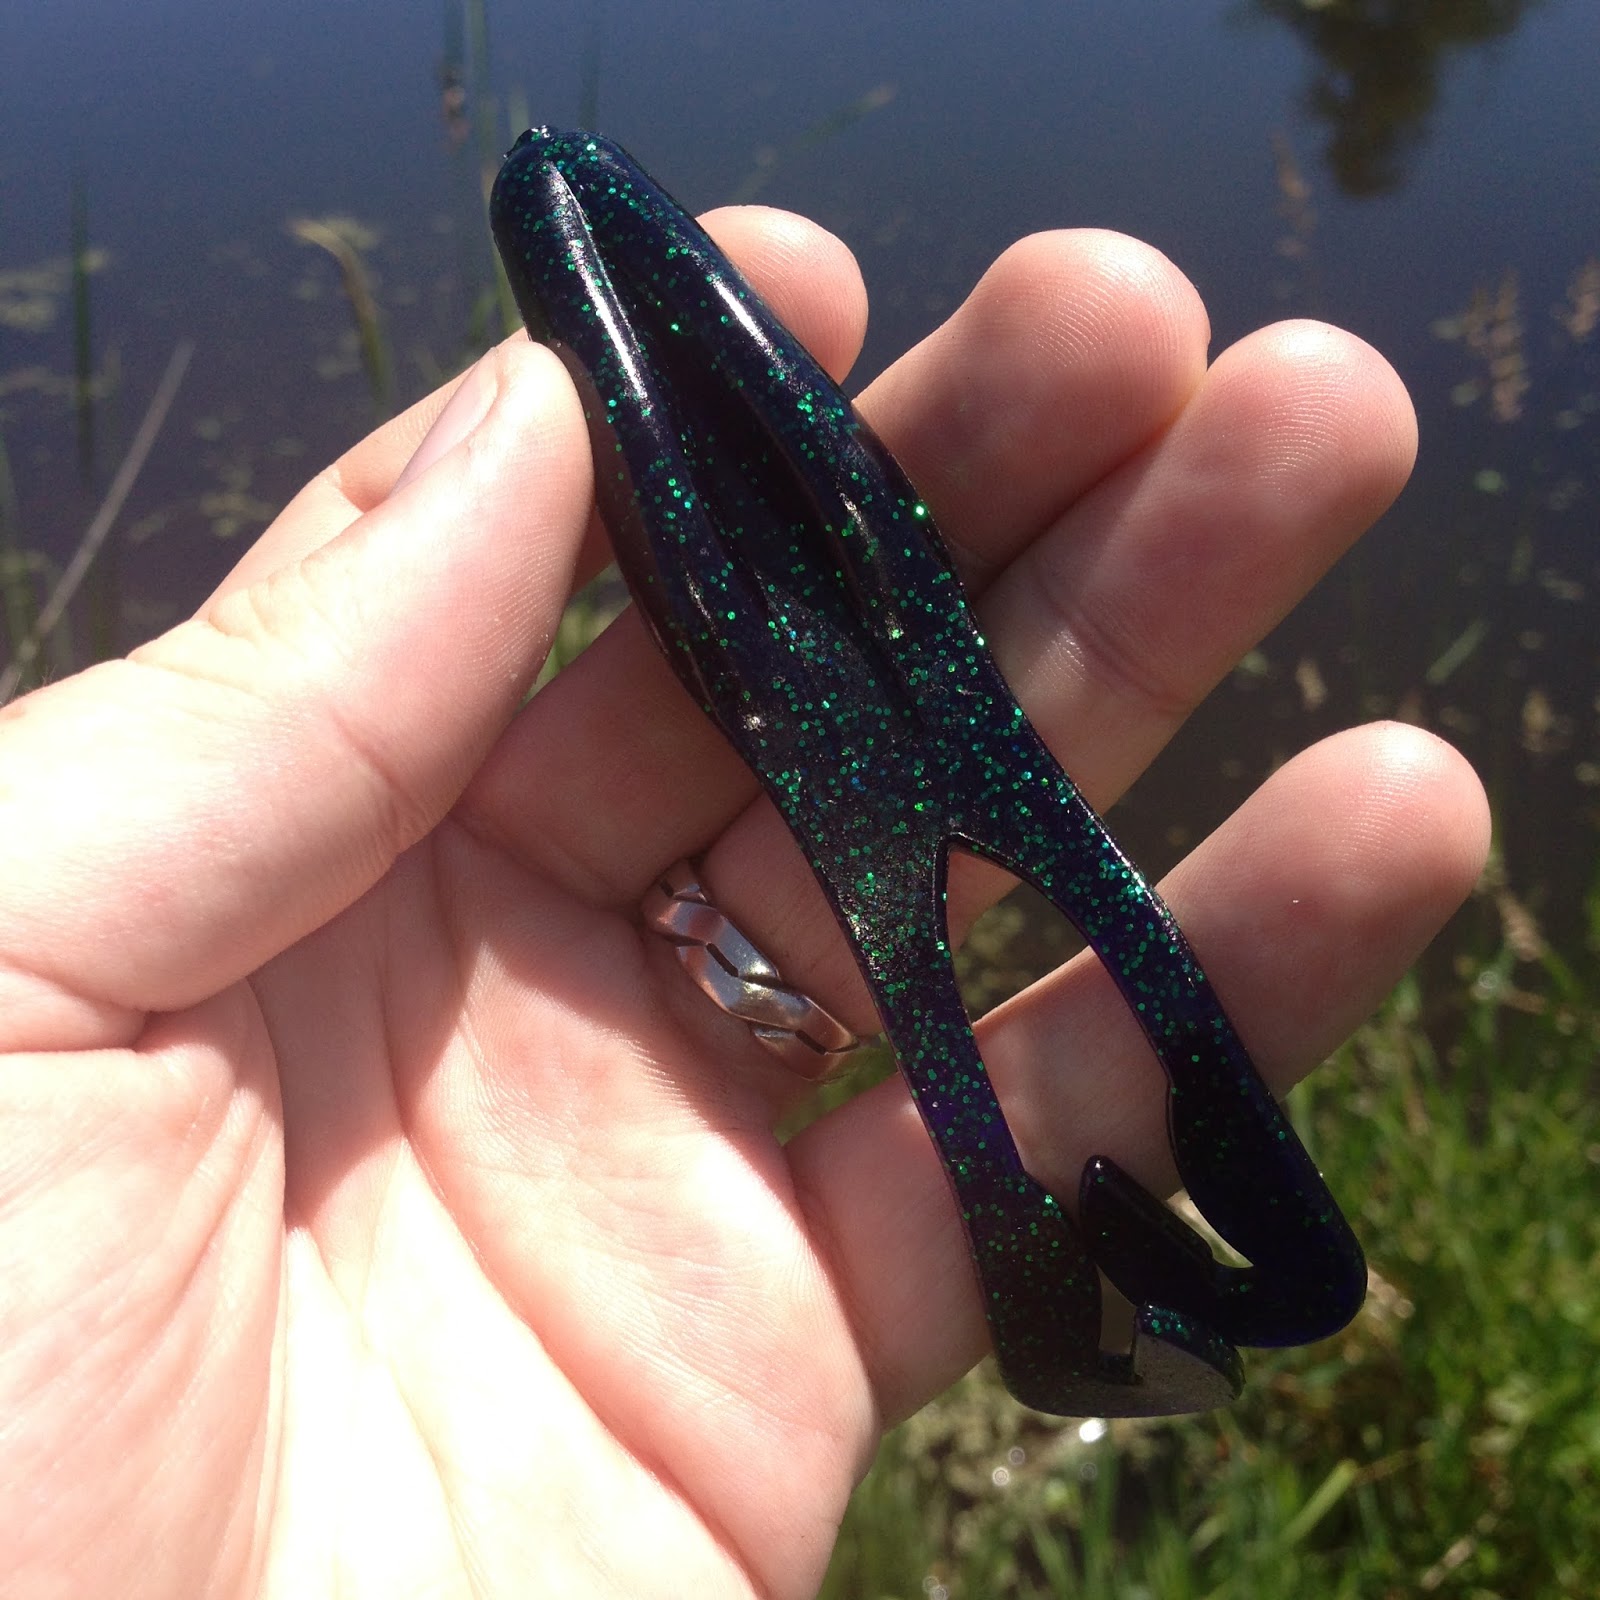 Bass Junkies Frog Pond: Gambler Buzz'n Cane Toad Review